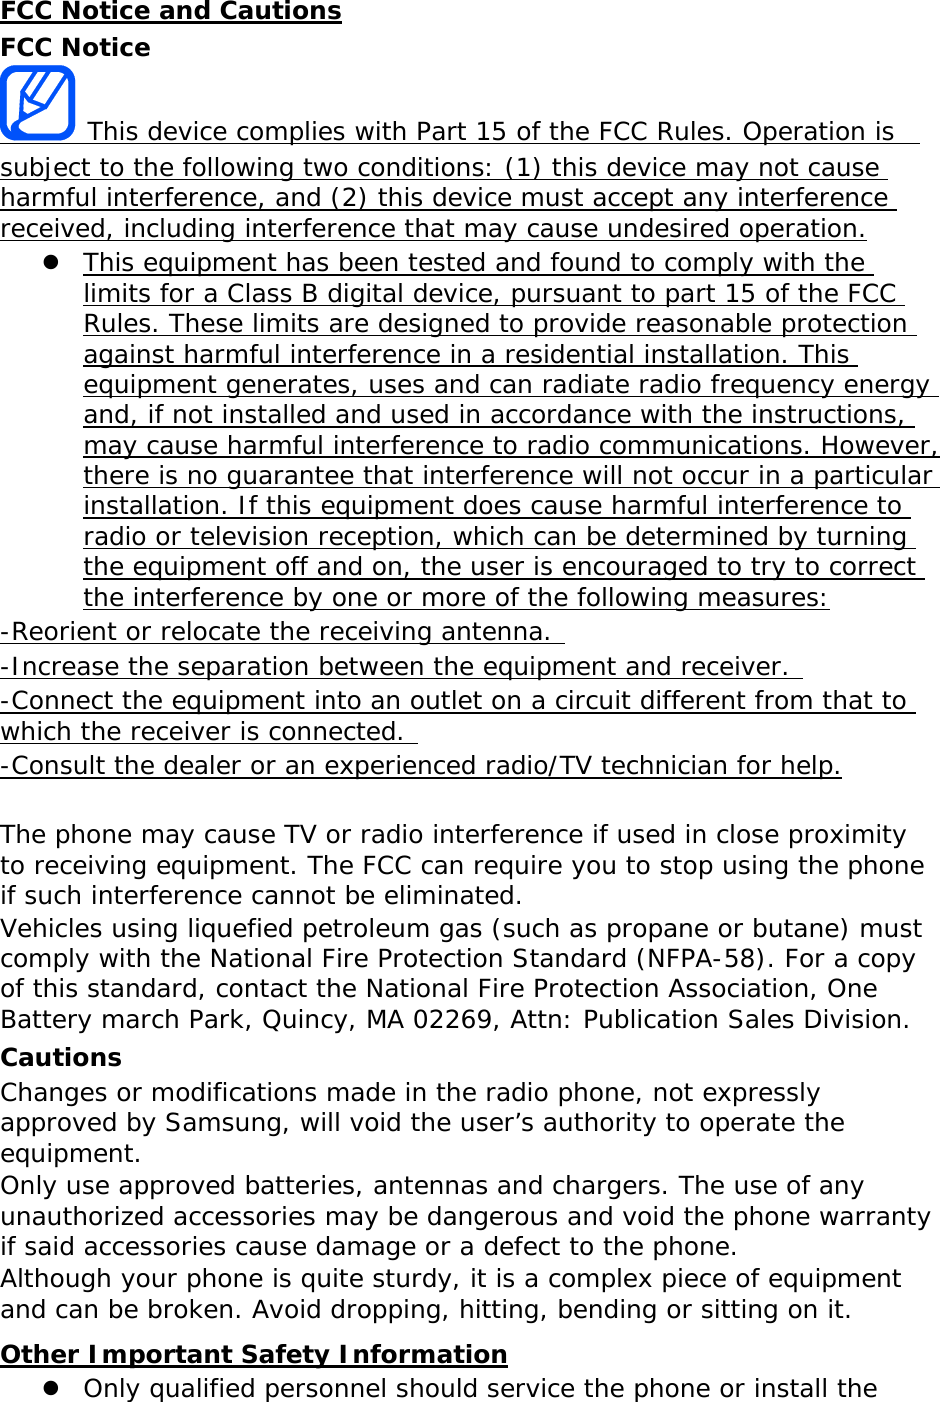 FCC Notice and Cautions FCC Notice  This device complies with Part 15 of the FCC Rules. Operation is  subject to the following two conditions: (1) this device may not cause harmful interference, and (2) this device must accept any interference received, including interference that may cause undesired operation.  This equipment has been tested and found to comply with the limits for a Class B digital device, pursuant to part 15 of the FCC Rules. These limits are designed to provide reasonable protection against harmful interference in a residential installation. This equipment generates, uses and can radiate radio frequency energy and, if not installed and used in accordance with the instructions, may cause harmful interference to radio communications. However, there is no guarantee that interference will not occur in a particular installation. If this equipment does cause harmful interference to radio or television reception, which can be determined by turning the equipment off and on, the user is encouraged to try to correct the interference by one or more of the following measures: -Reorient or relocate the receiving antenna.  -Increase the separation between the equipment and receiver.  -Connect the equipment into an outlet on a circuit different from that to which the receiver is connected.  -Consult the dealer or an experienced radio/TV technician for help.  The phone may cause TV or radio interference if used in close proximity to receiving equipment. The FCC can require you to stop using the phone if such interference cannot be eliminated. Vehicles using liquefied petroleum gas (such as propane or butane) must comply with the National Fire Protection Standard (NFPA-58). For a copy of this standard, contact the National Fire Protection Association, One Battery march Park, Quincy, MA 02269, Attn: Publication Sales Division. Cautions Changes or modifications made in the radio phone, not expressly approved by Samsung, will void the user’s authority to operate the  equipment. Only use approved batteries, antennas and chargers. The use of any unauthorized accessories may be dangerous and void the phone warranty if said accessories cause damage or a defect to the phone. Although your phone is quite sturdy, it is a complex piece of equipment and can be broken. Avoid dropping, hitting, bending or sitting on it. Other Important Safety Information  Only qualified personnel should service the phone or install the 